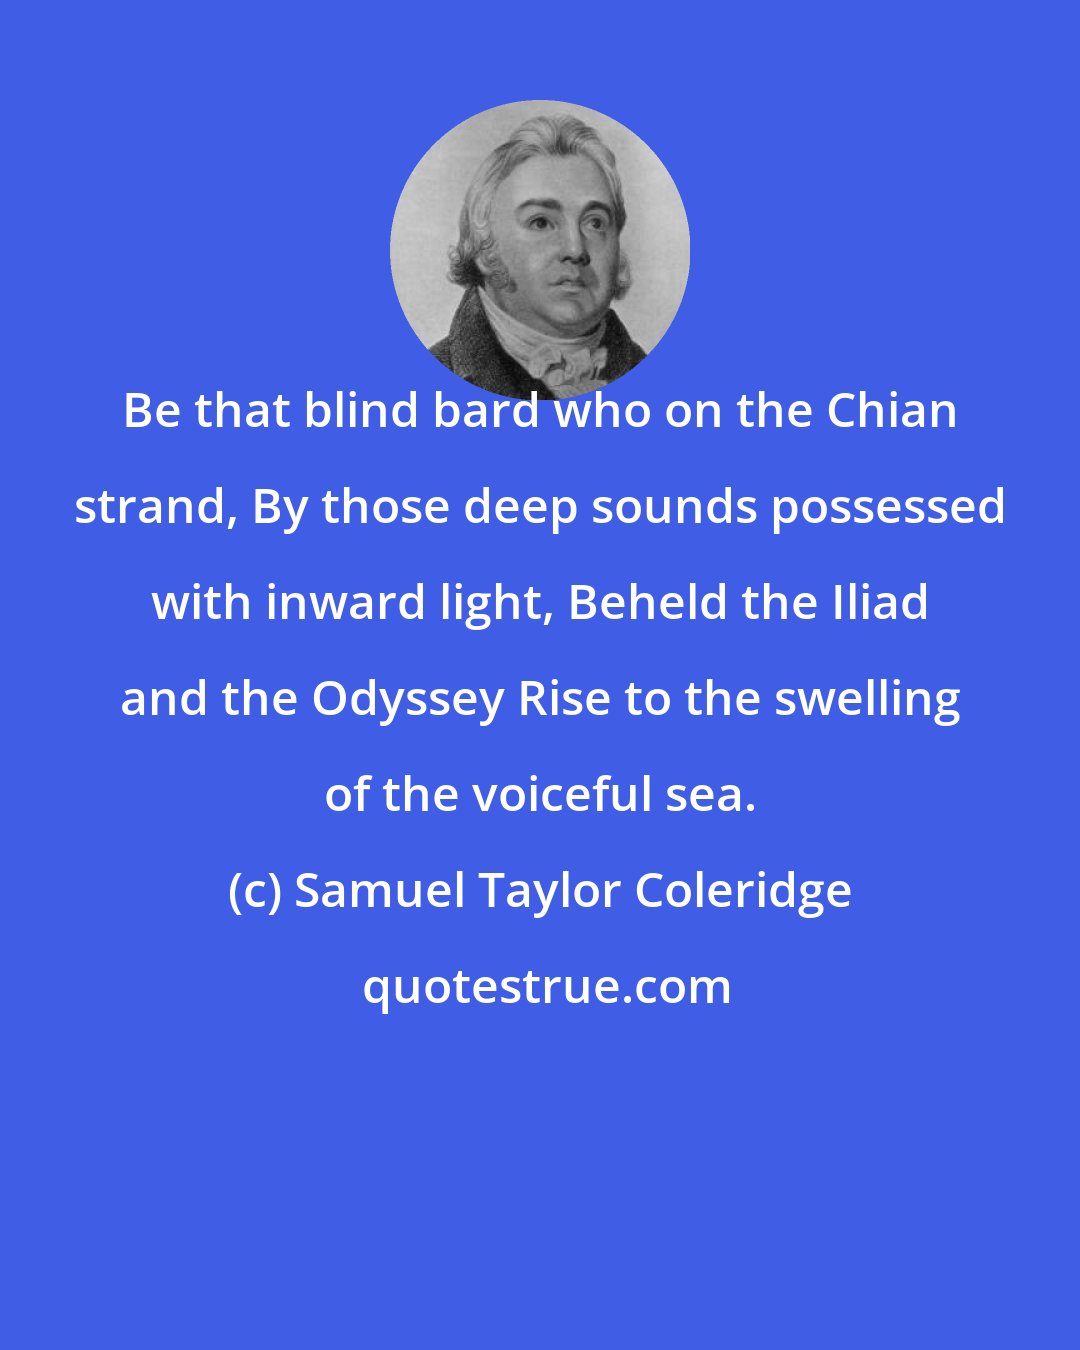 Samuel Taylor Coleridge: Be that blind bard who on the Chian strand, By those deep sounds possessed with inward light, Beheld the Iliad and the Odyssey Rise to the swelling of the voiceful sea.